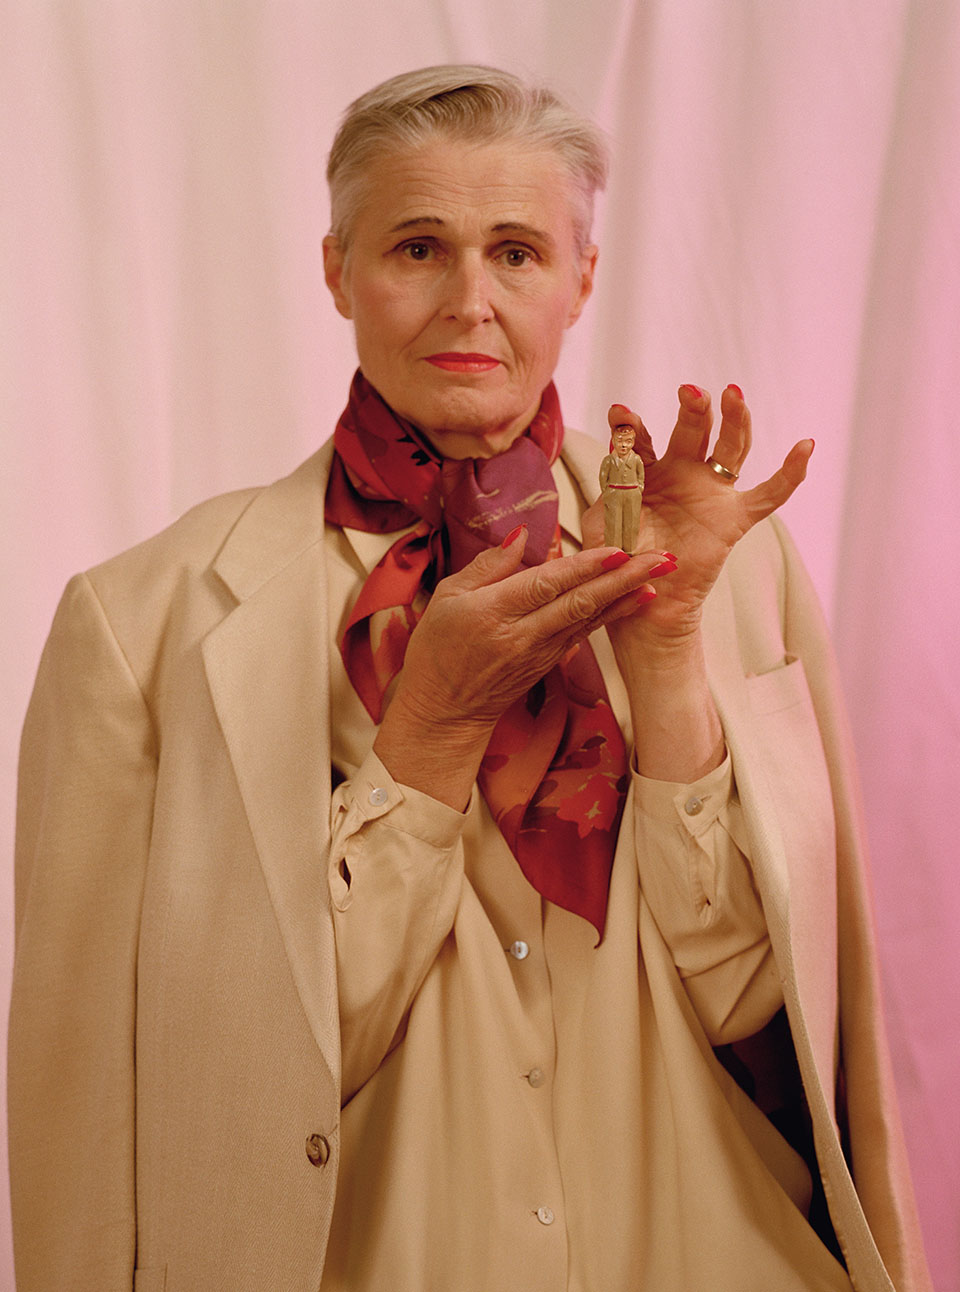 Image from The Cosmic Dominatrix. Linn as Dominatrix of Curators in white suit with red scarf. Linn is holding a small toy figure of a man.